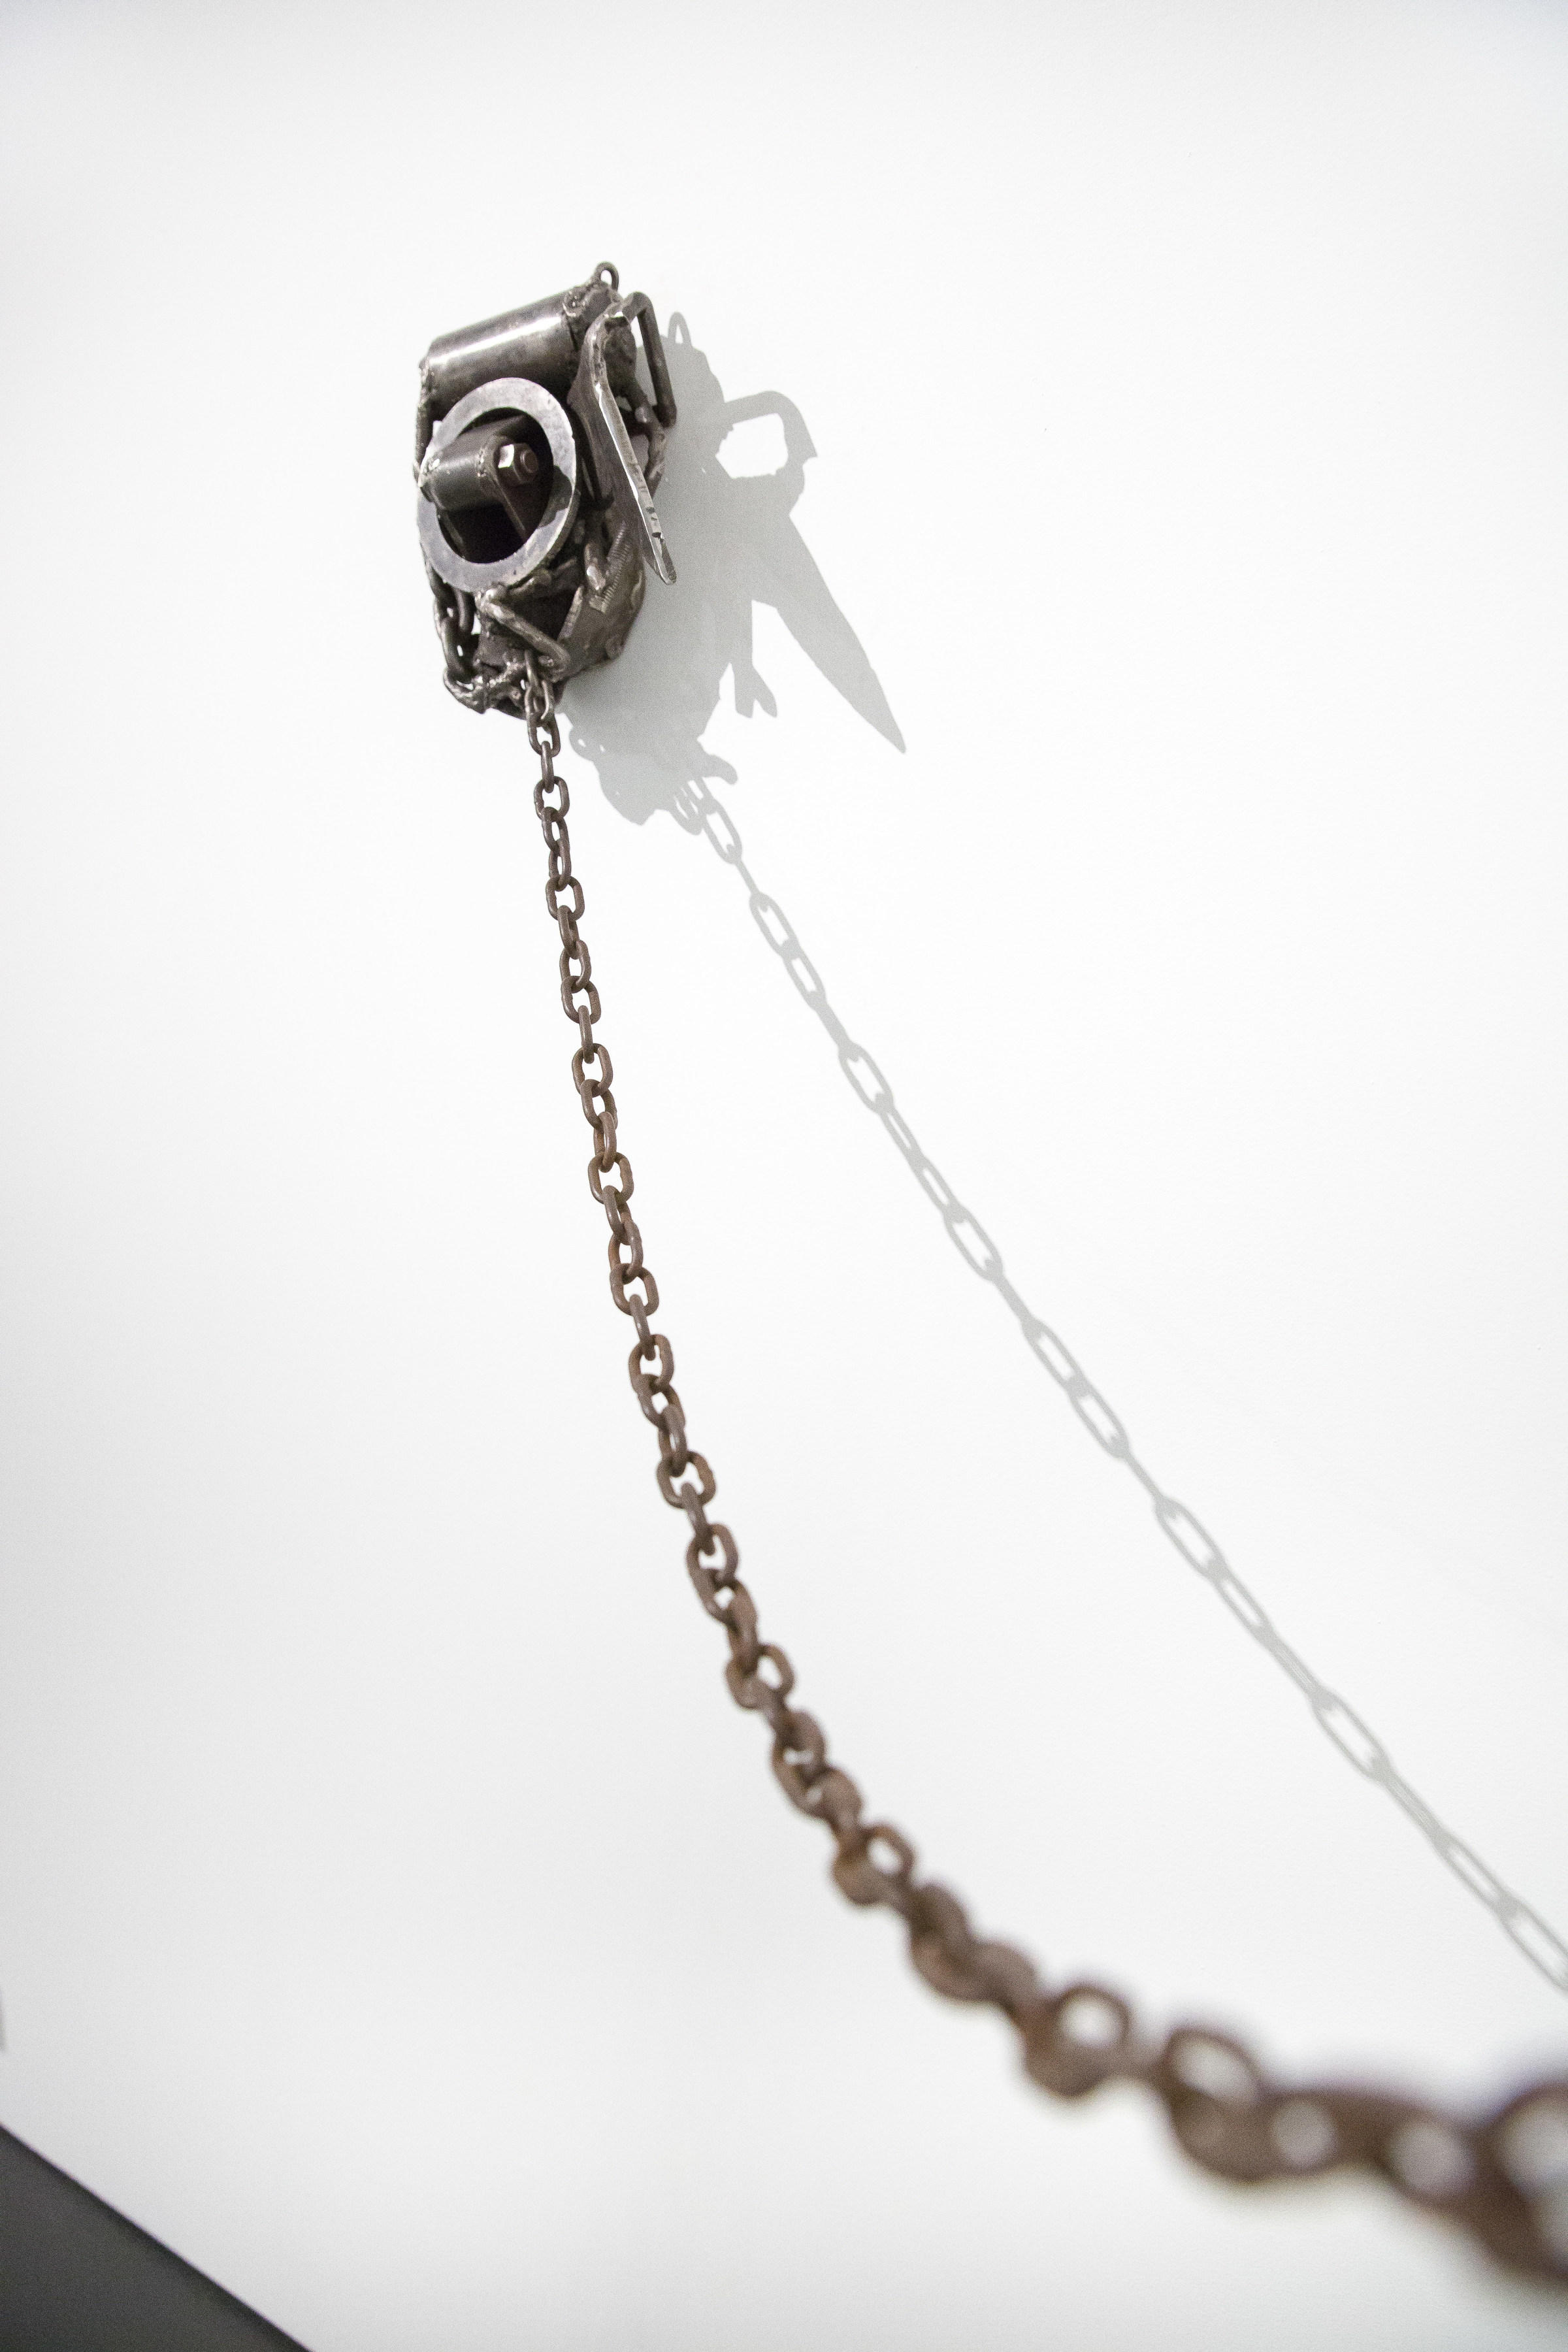 Two is One, detail, 2016, welded steel and chain, dimensions variable